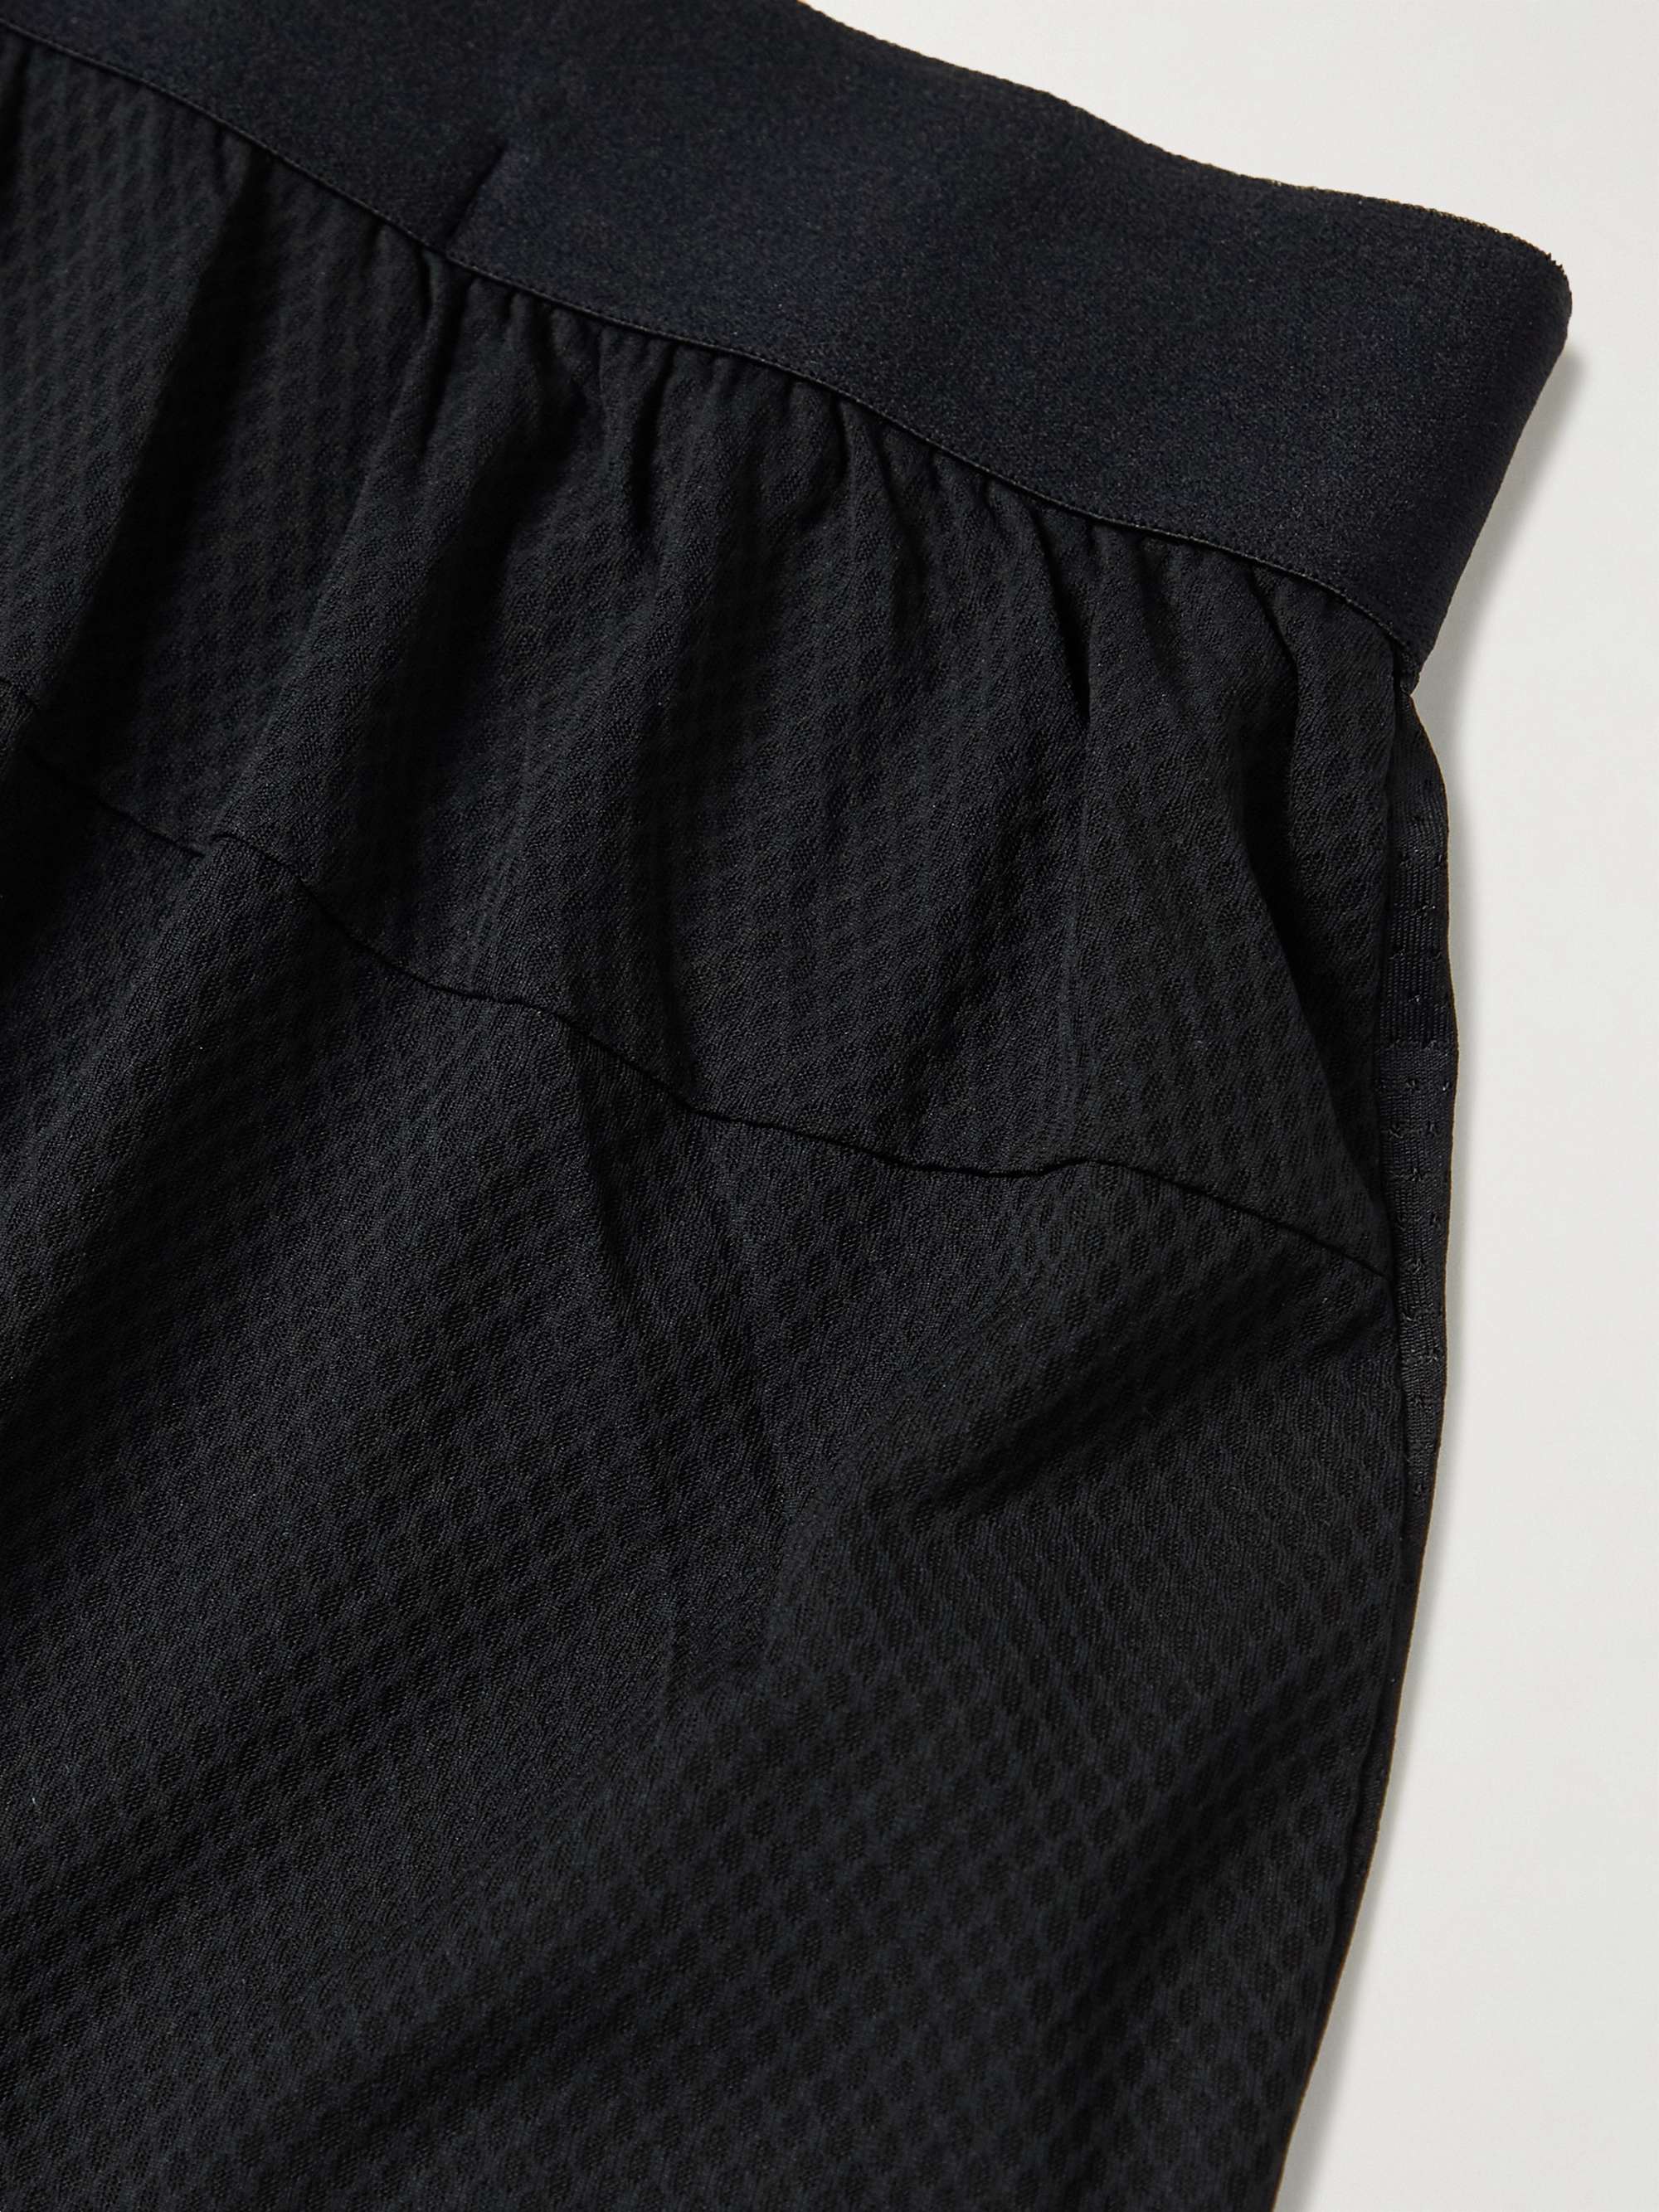 ASICS Ventilate 2-N-1 Mesh and Stretch-Jersey Shorts